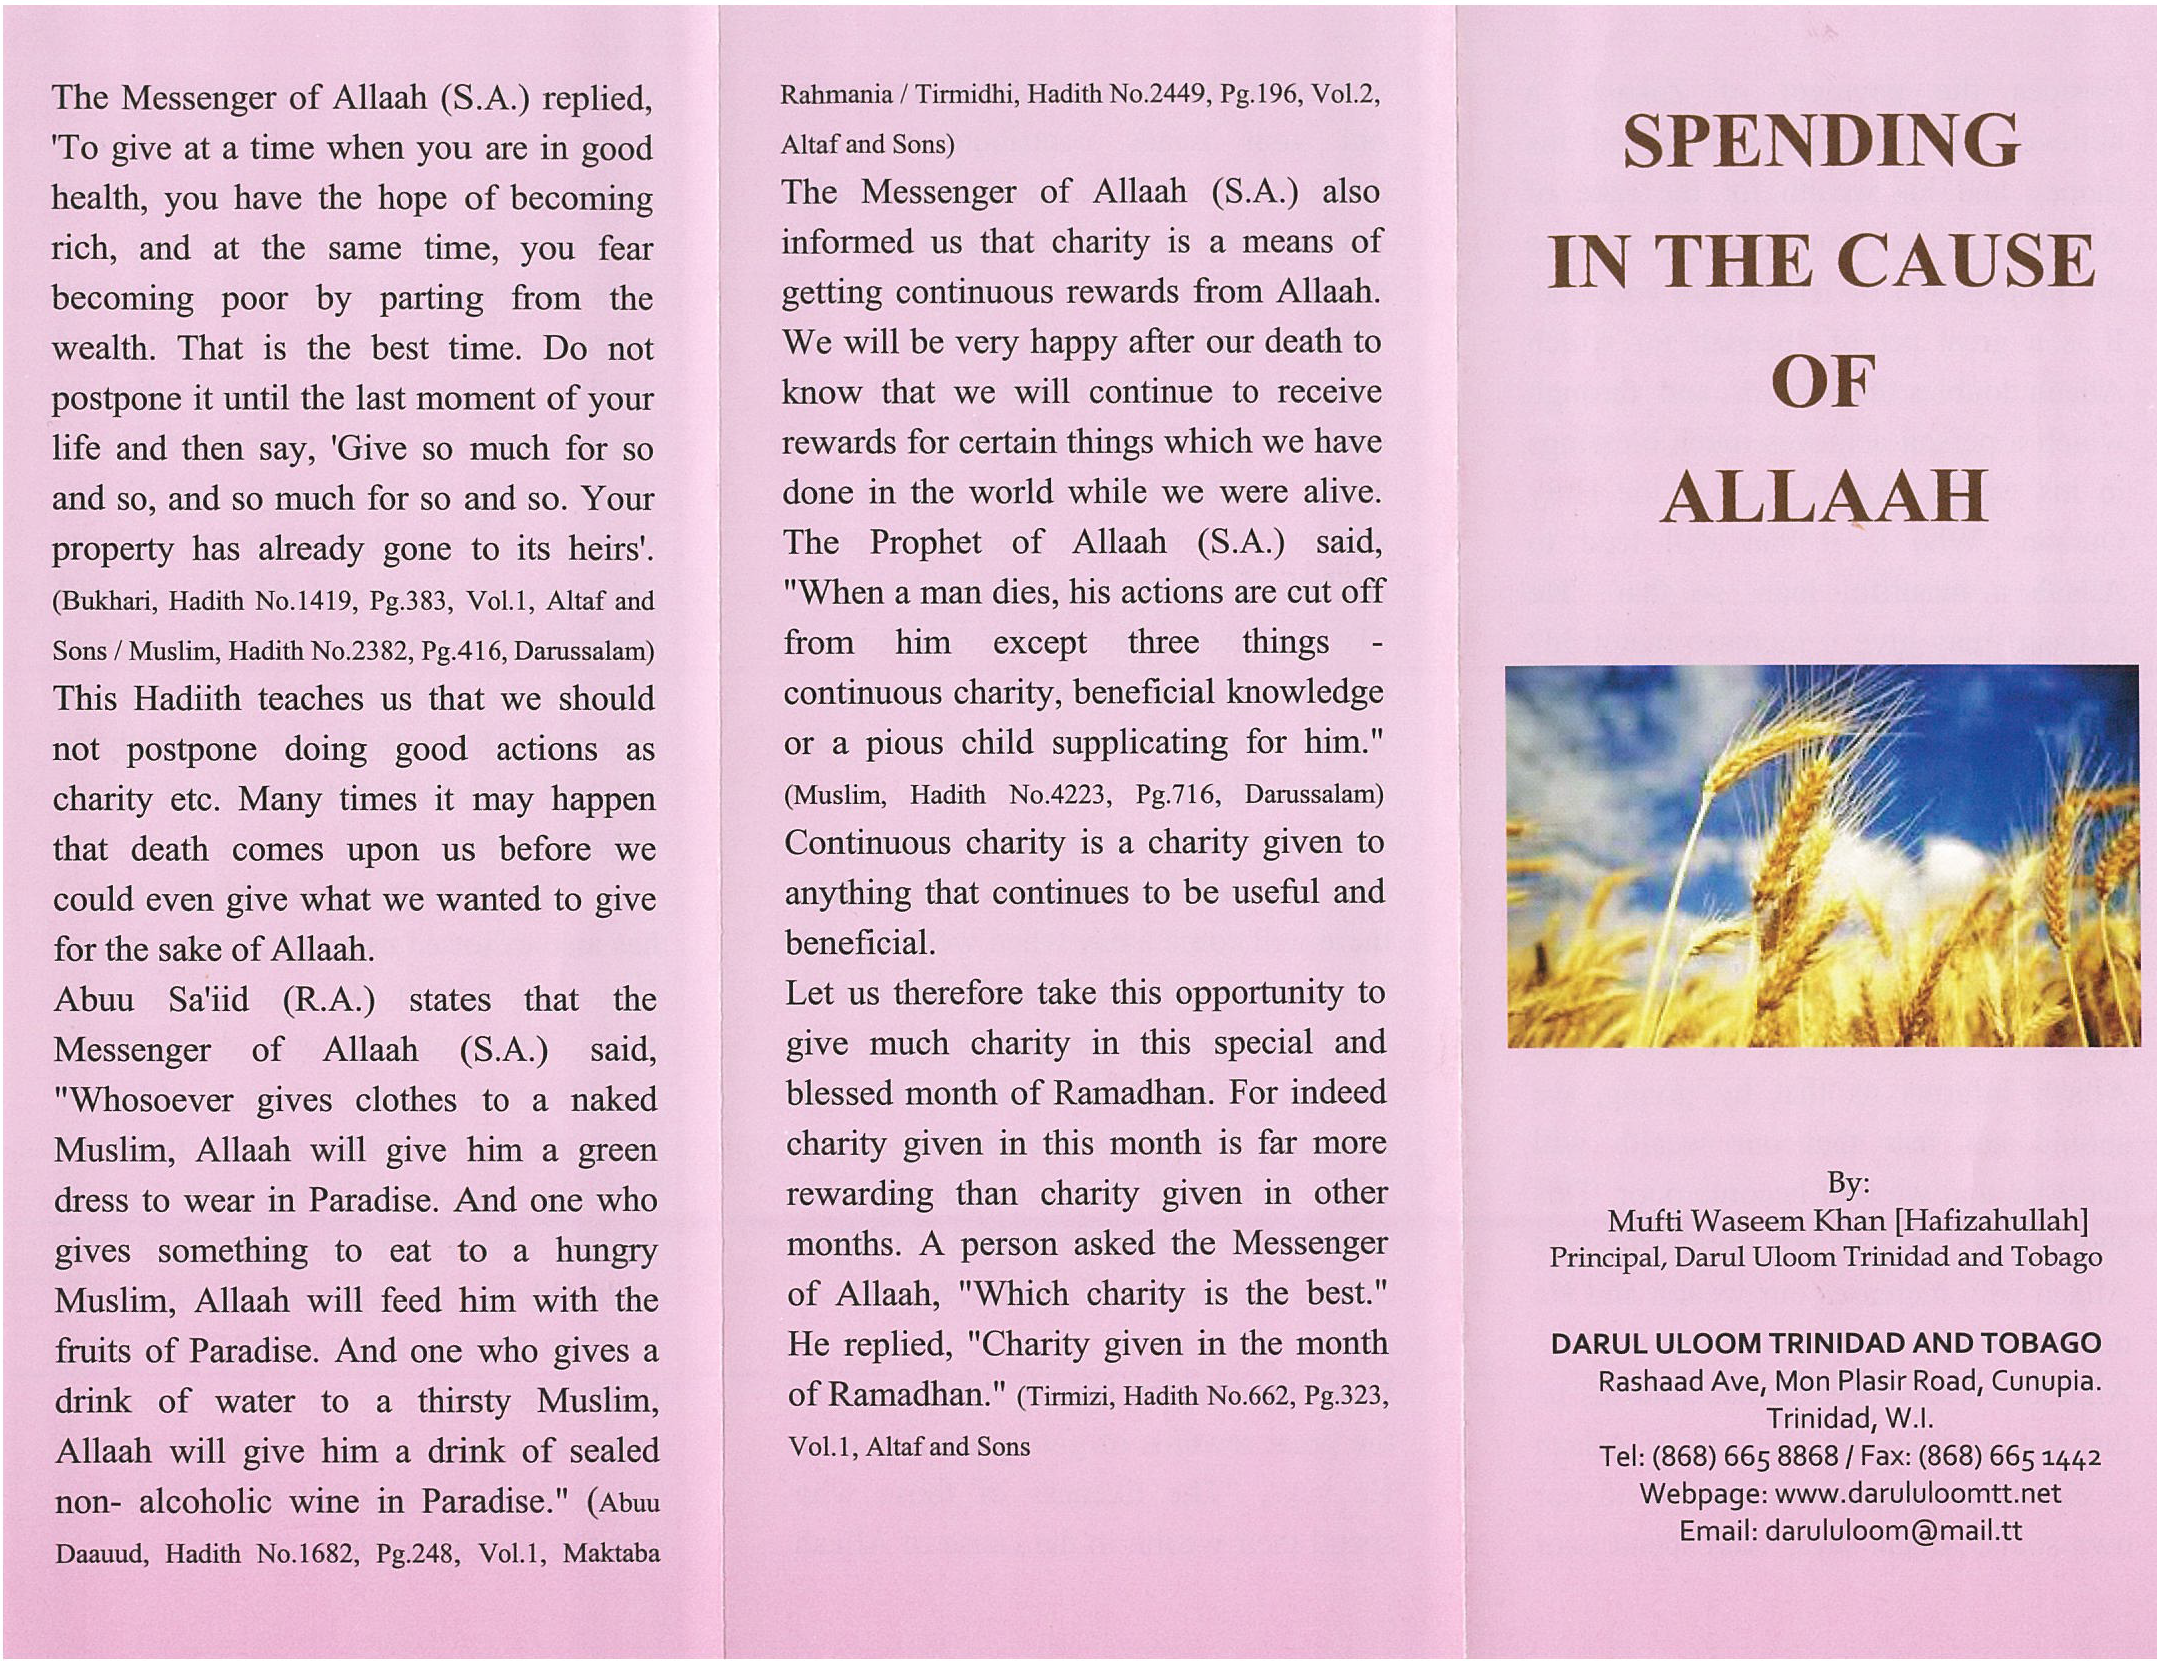 Spending In The Cause of Allah (Palm Flex)